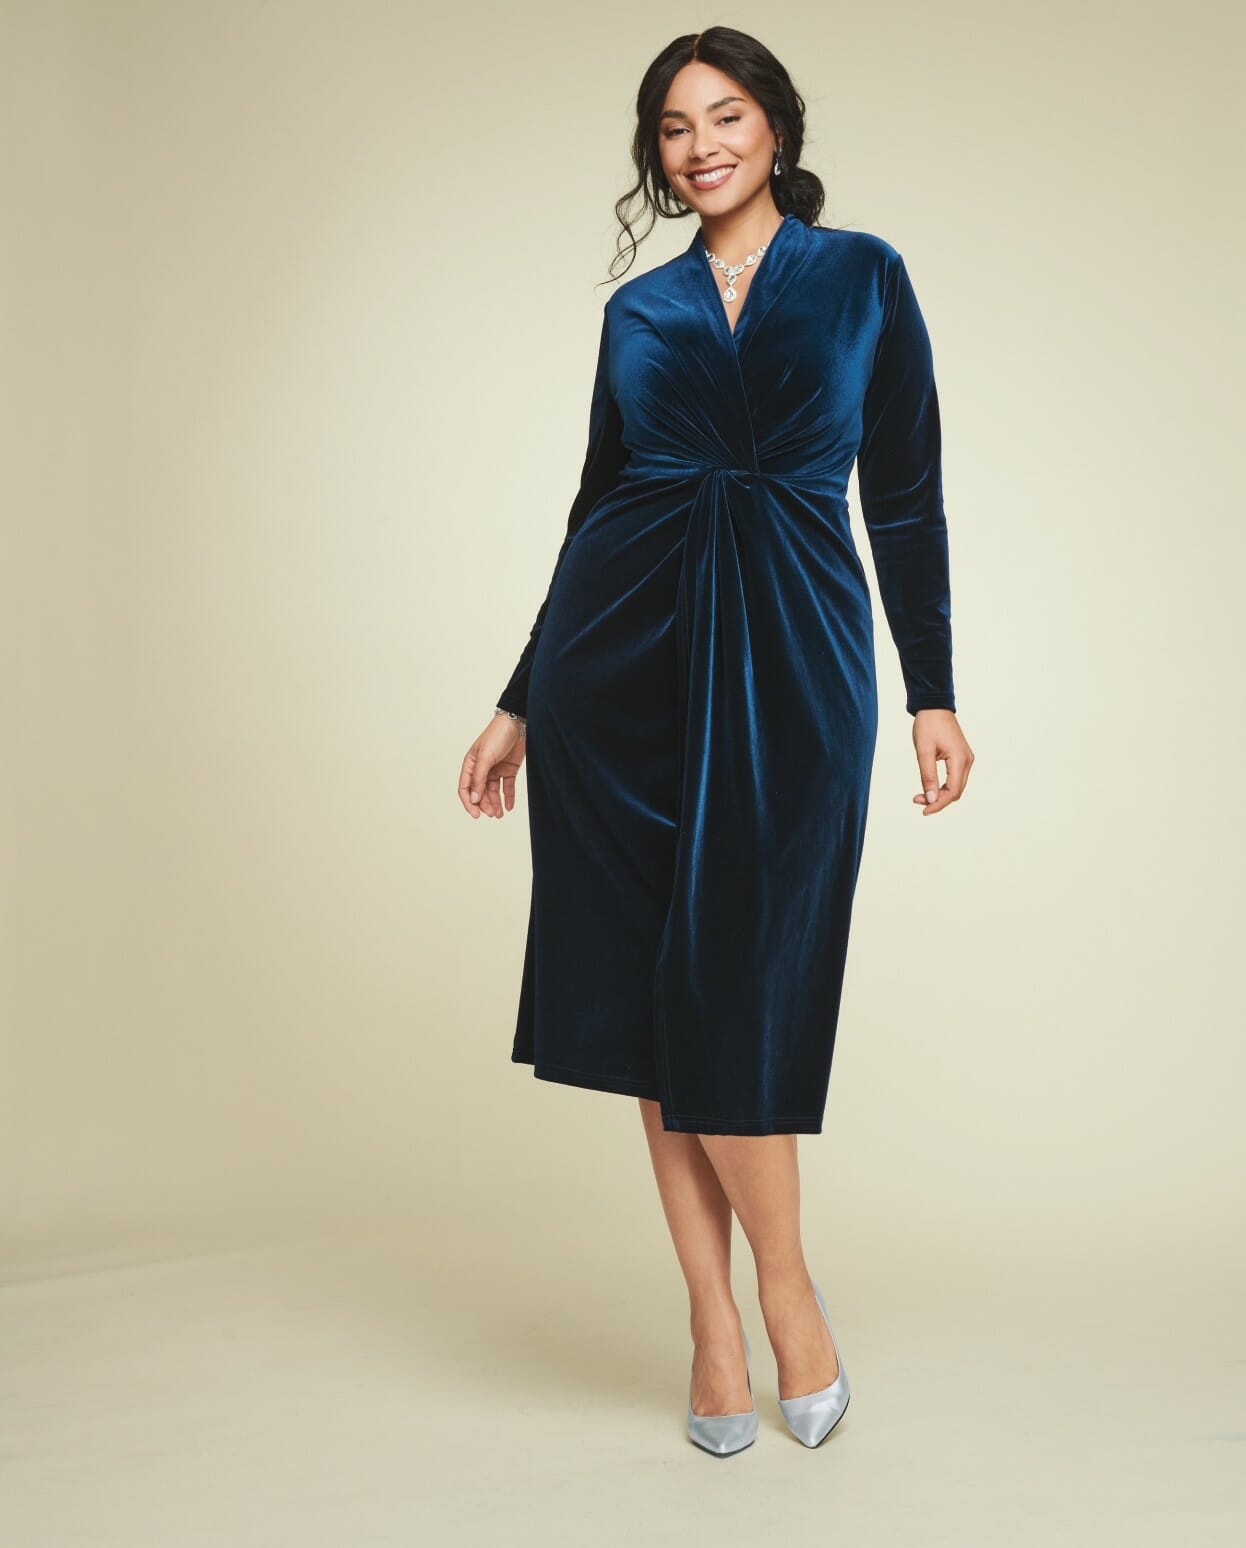 plus-size model wearing a navy long-sleeved dress with jewelry with silver heels.